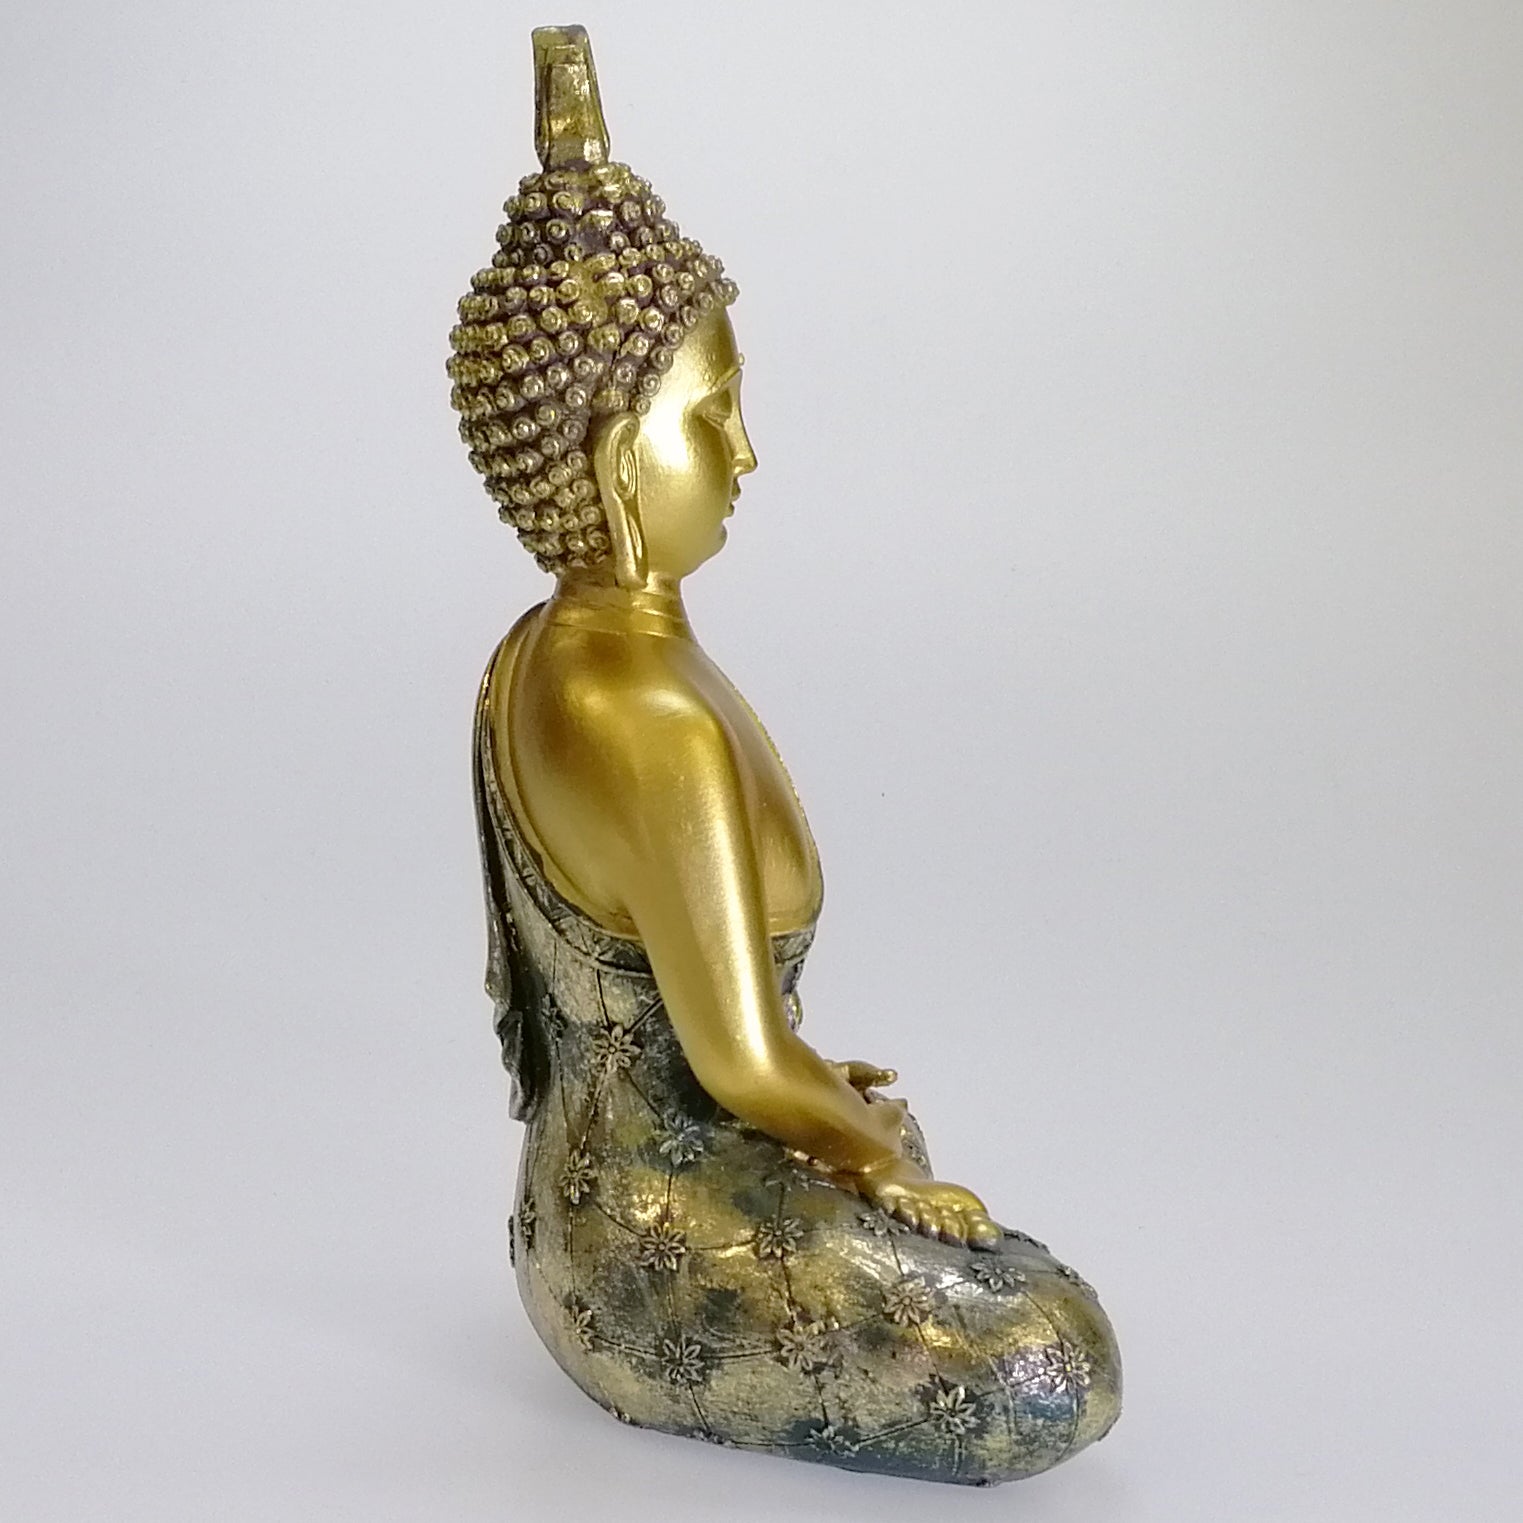 Buddha Figure - Painted Green and Gold - 25cm